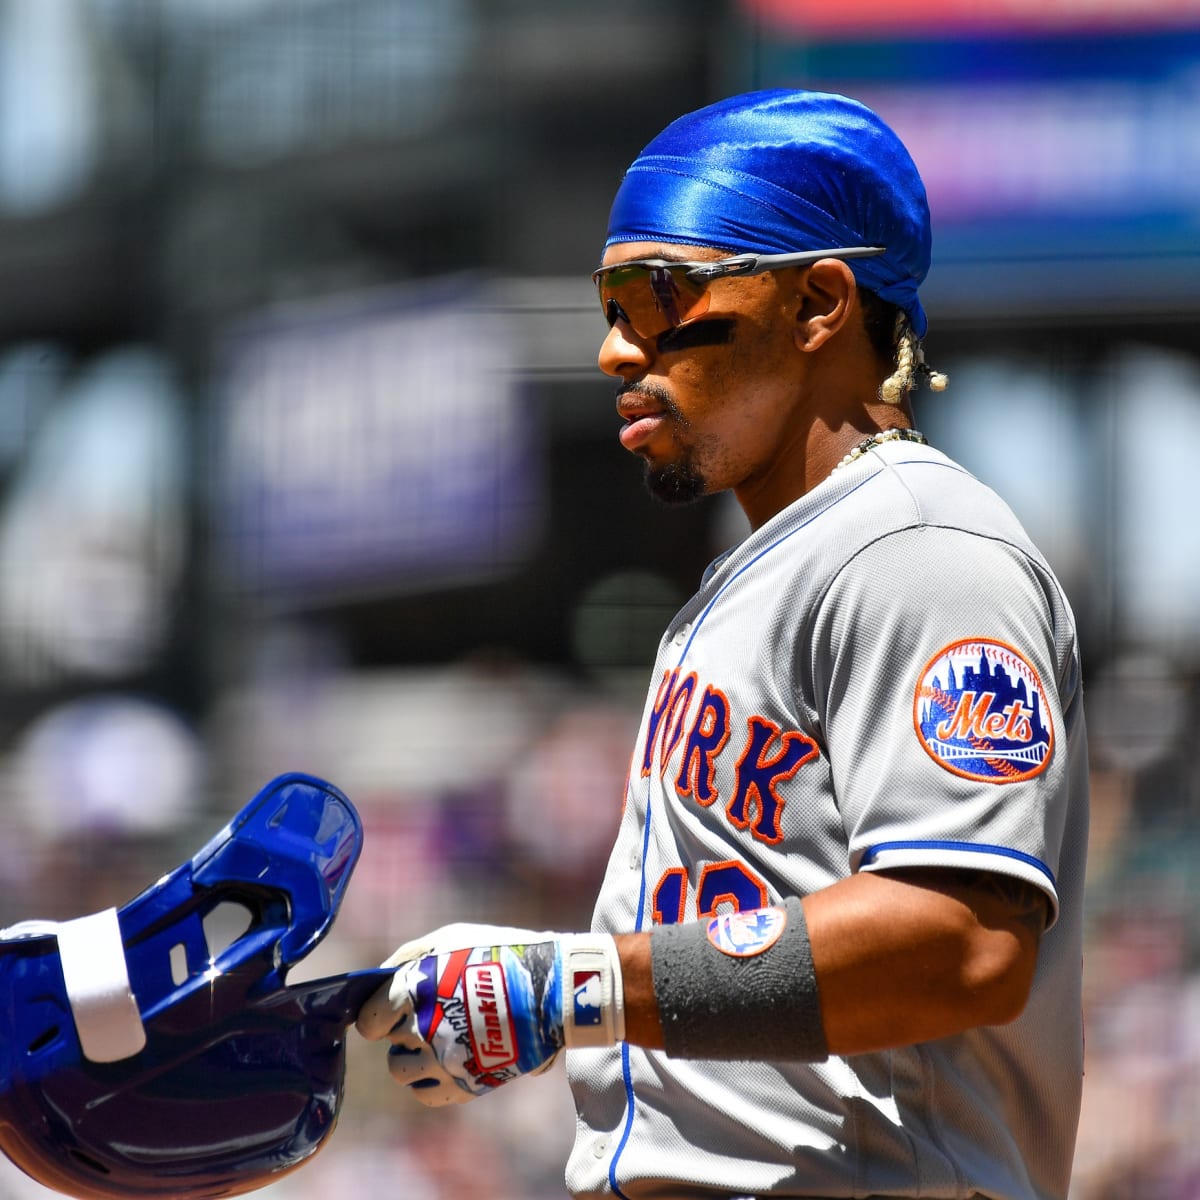 Welcome to NY: Lindor reacts to boos from Mets fans at home